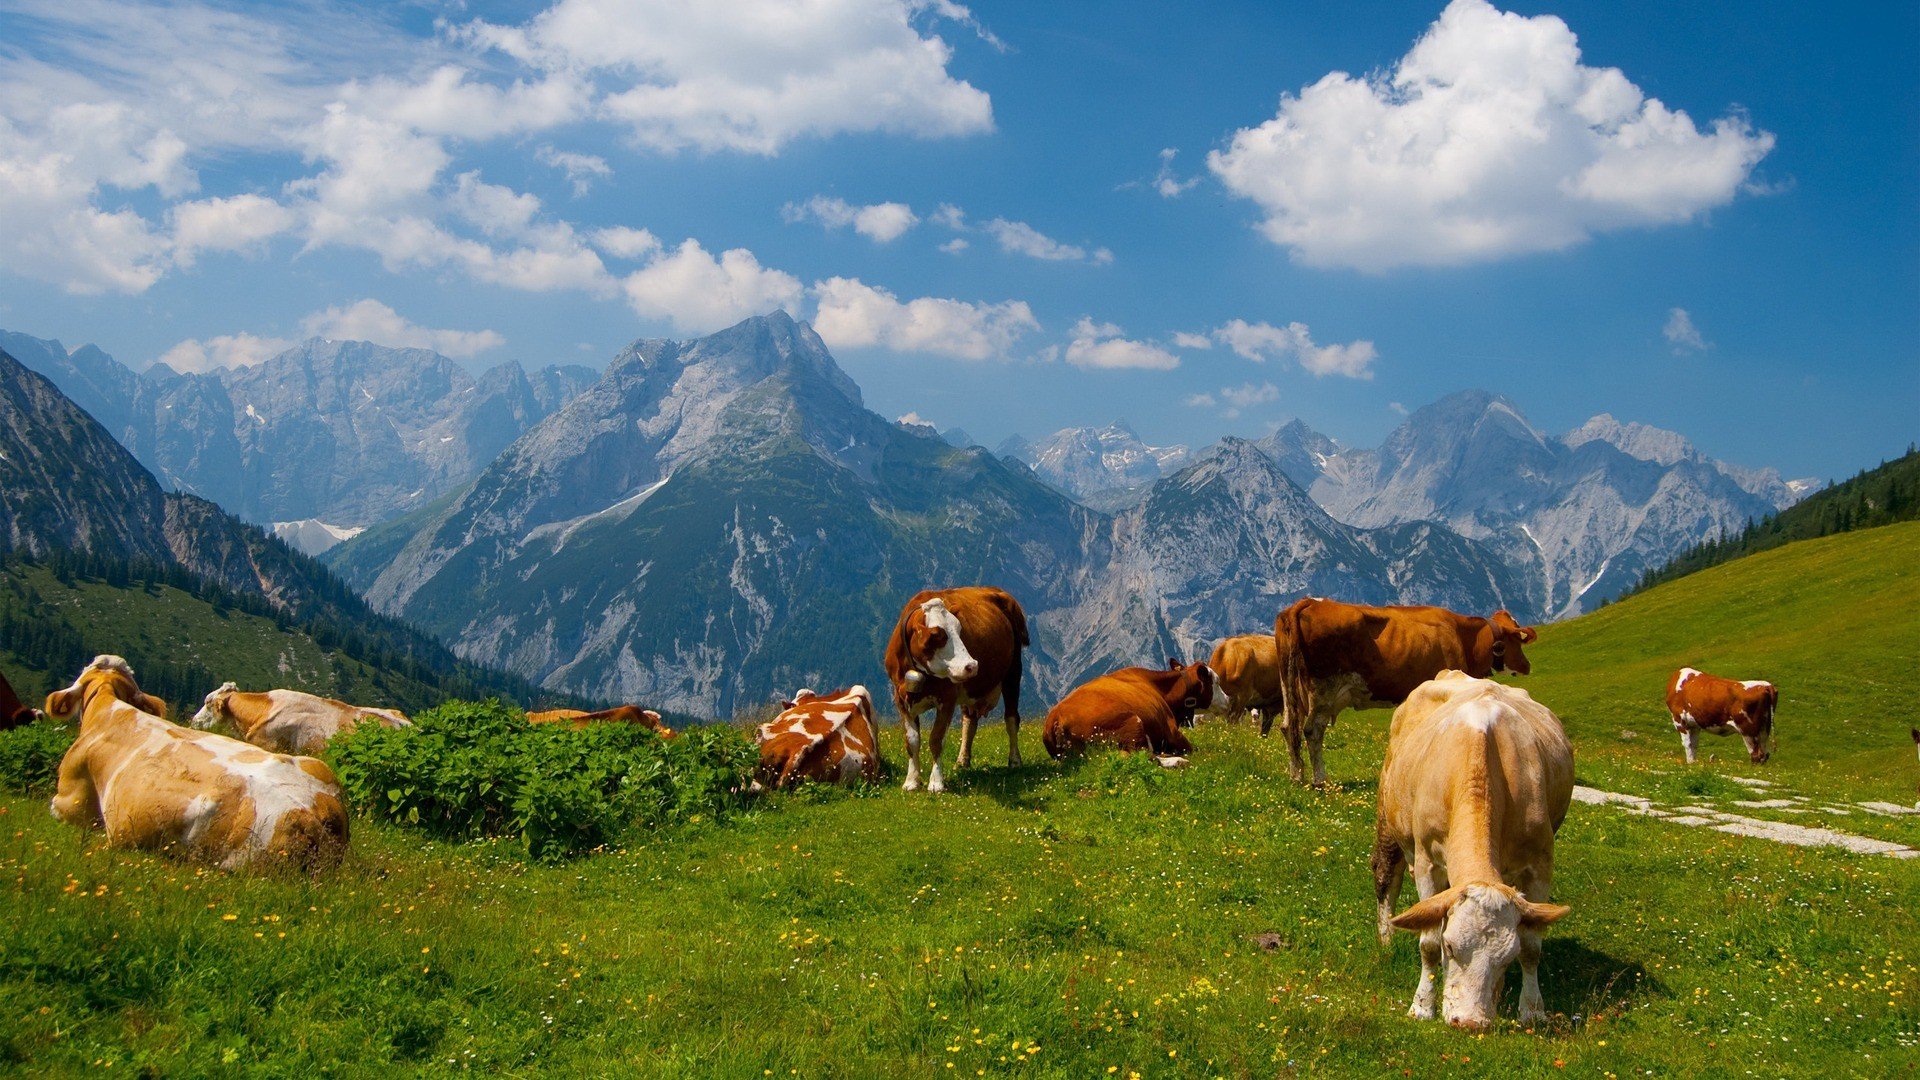 Mountains Landscapes Nature Animals Cows Wallpaper Background